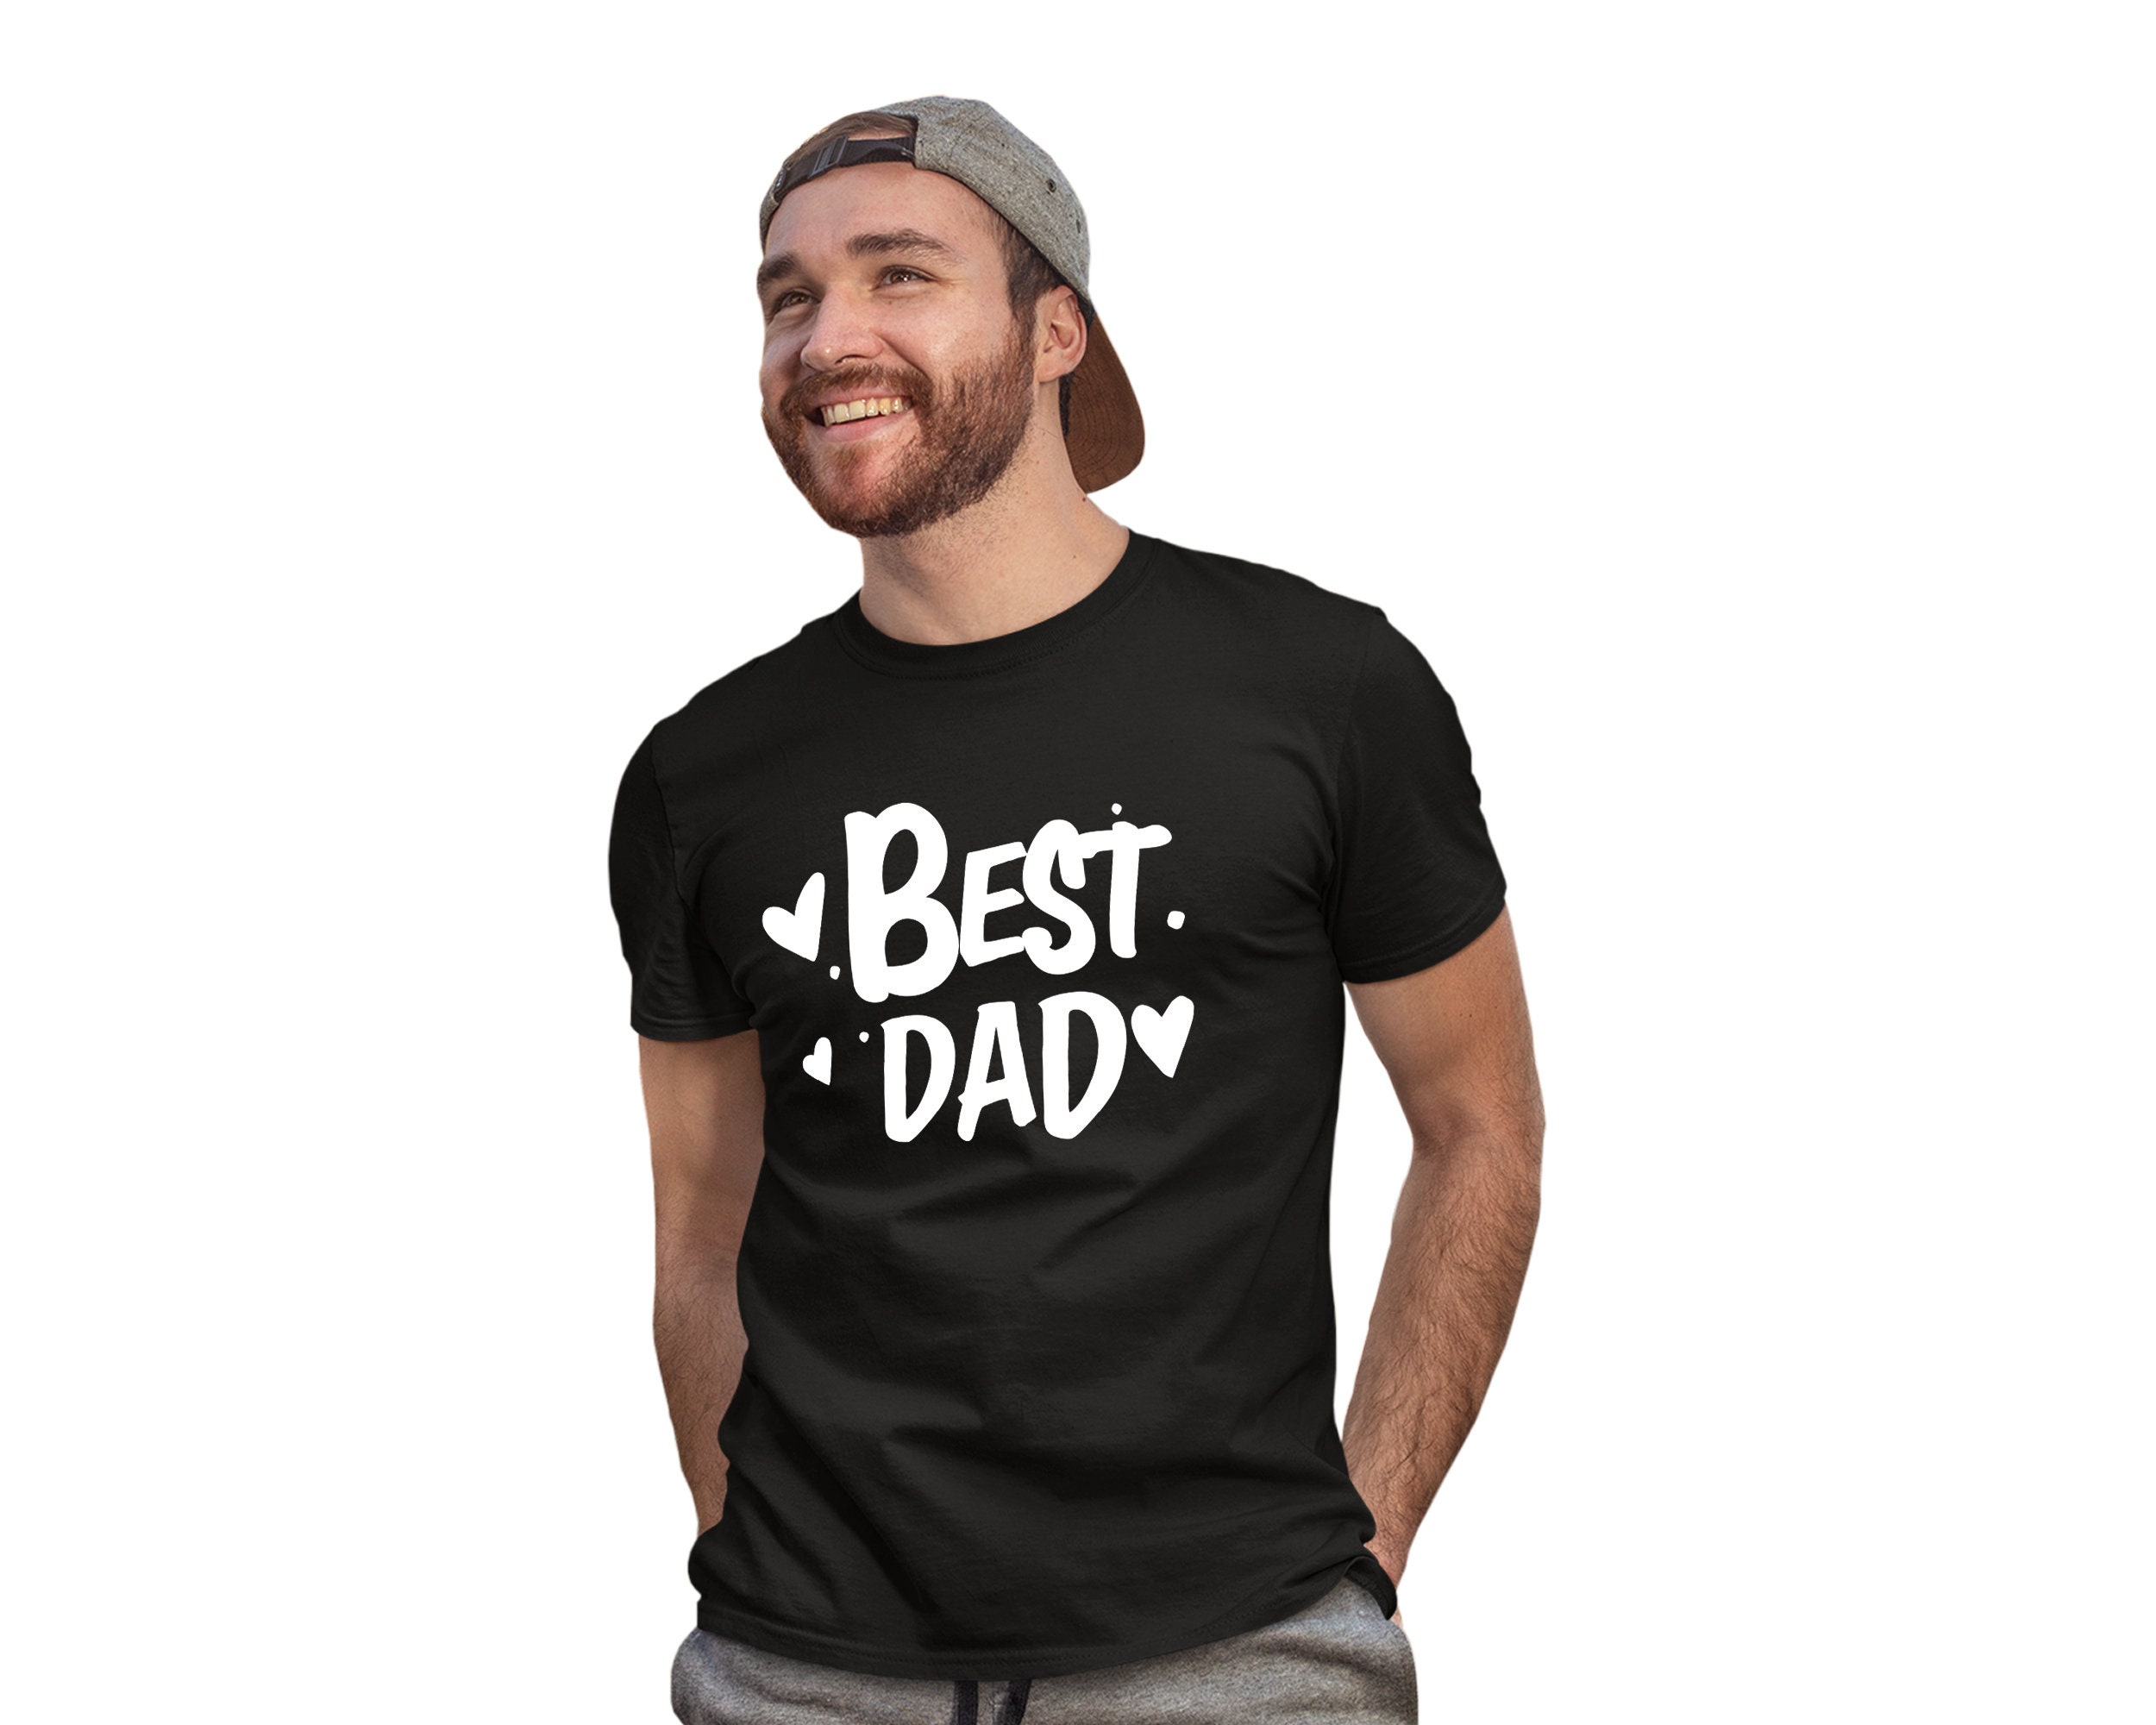 Dad Son Outfits Best Dad Best Son Shirts Dad and Son Shirts - Etsy